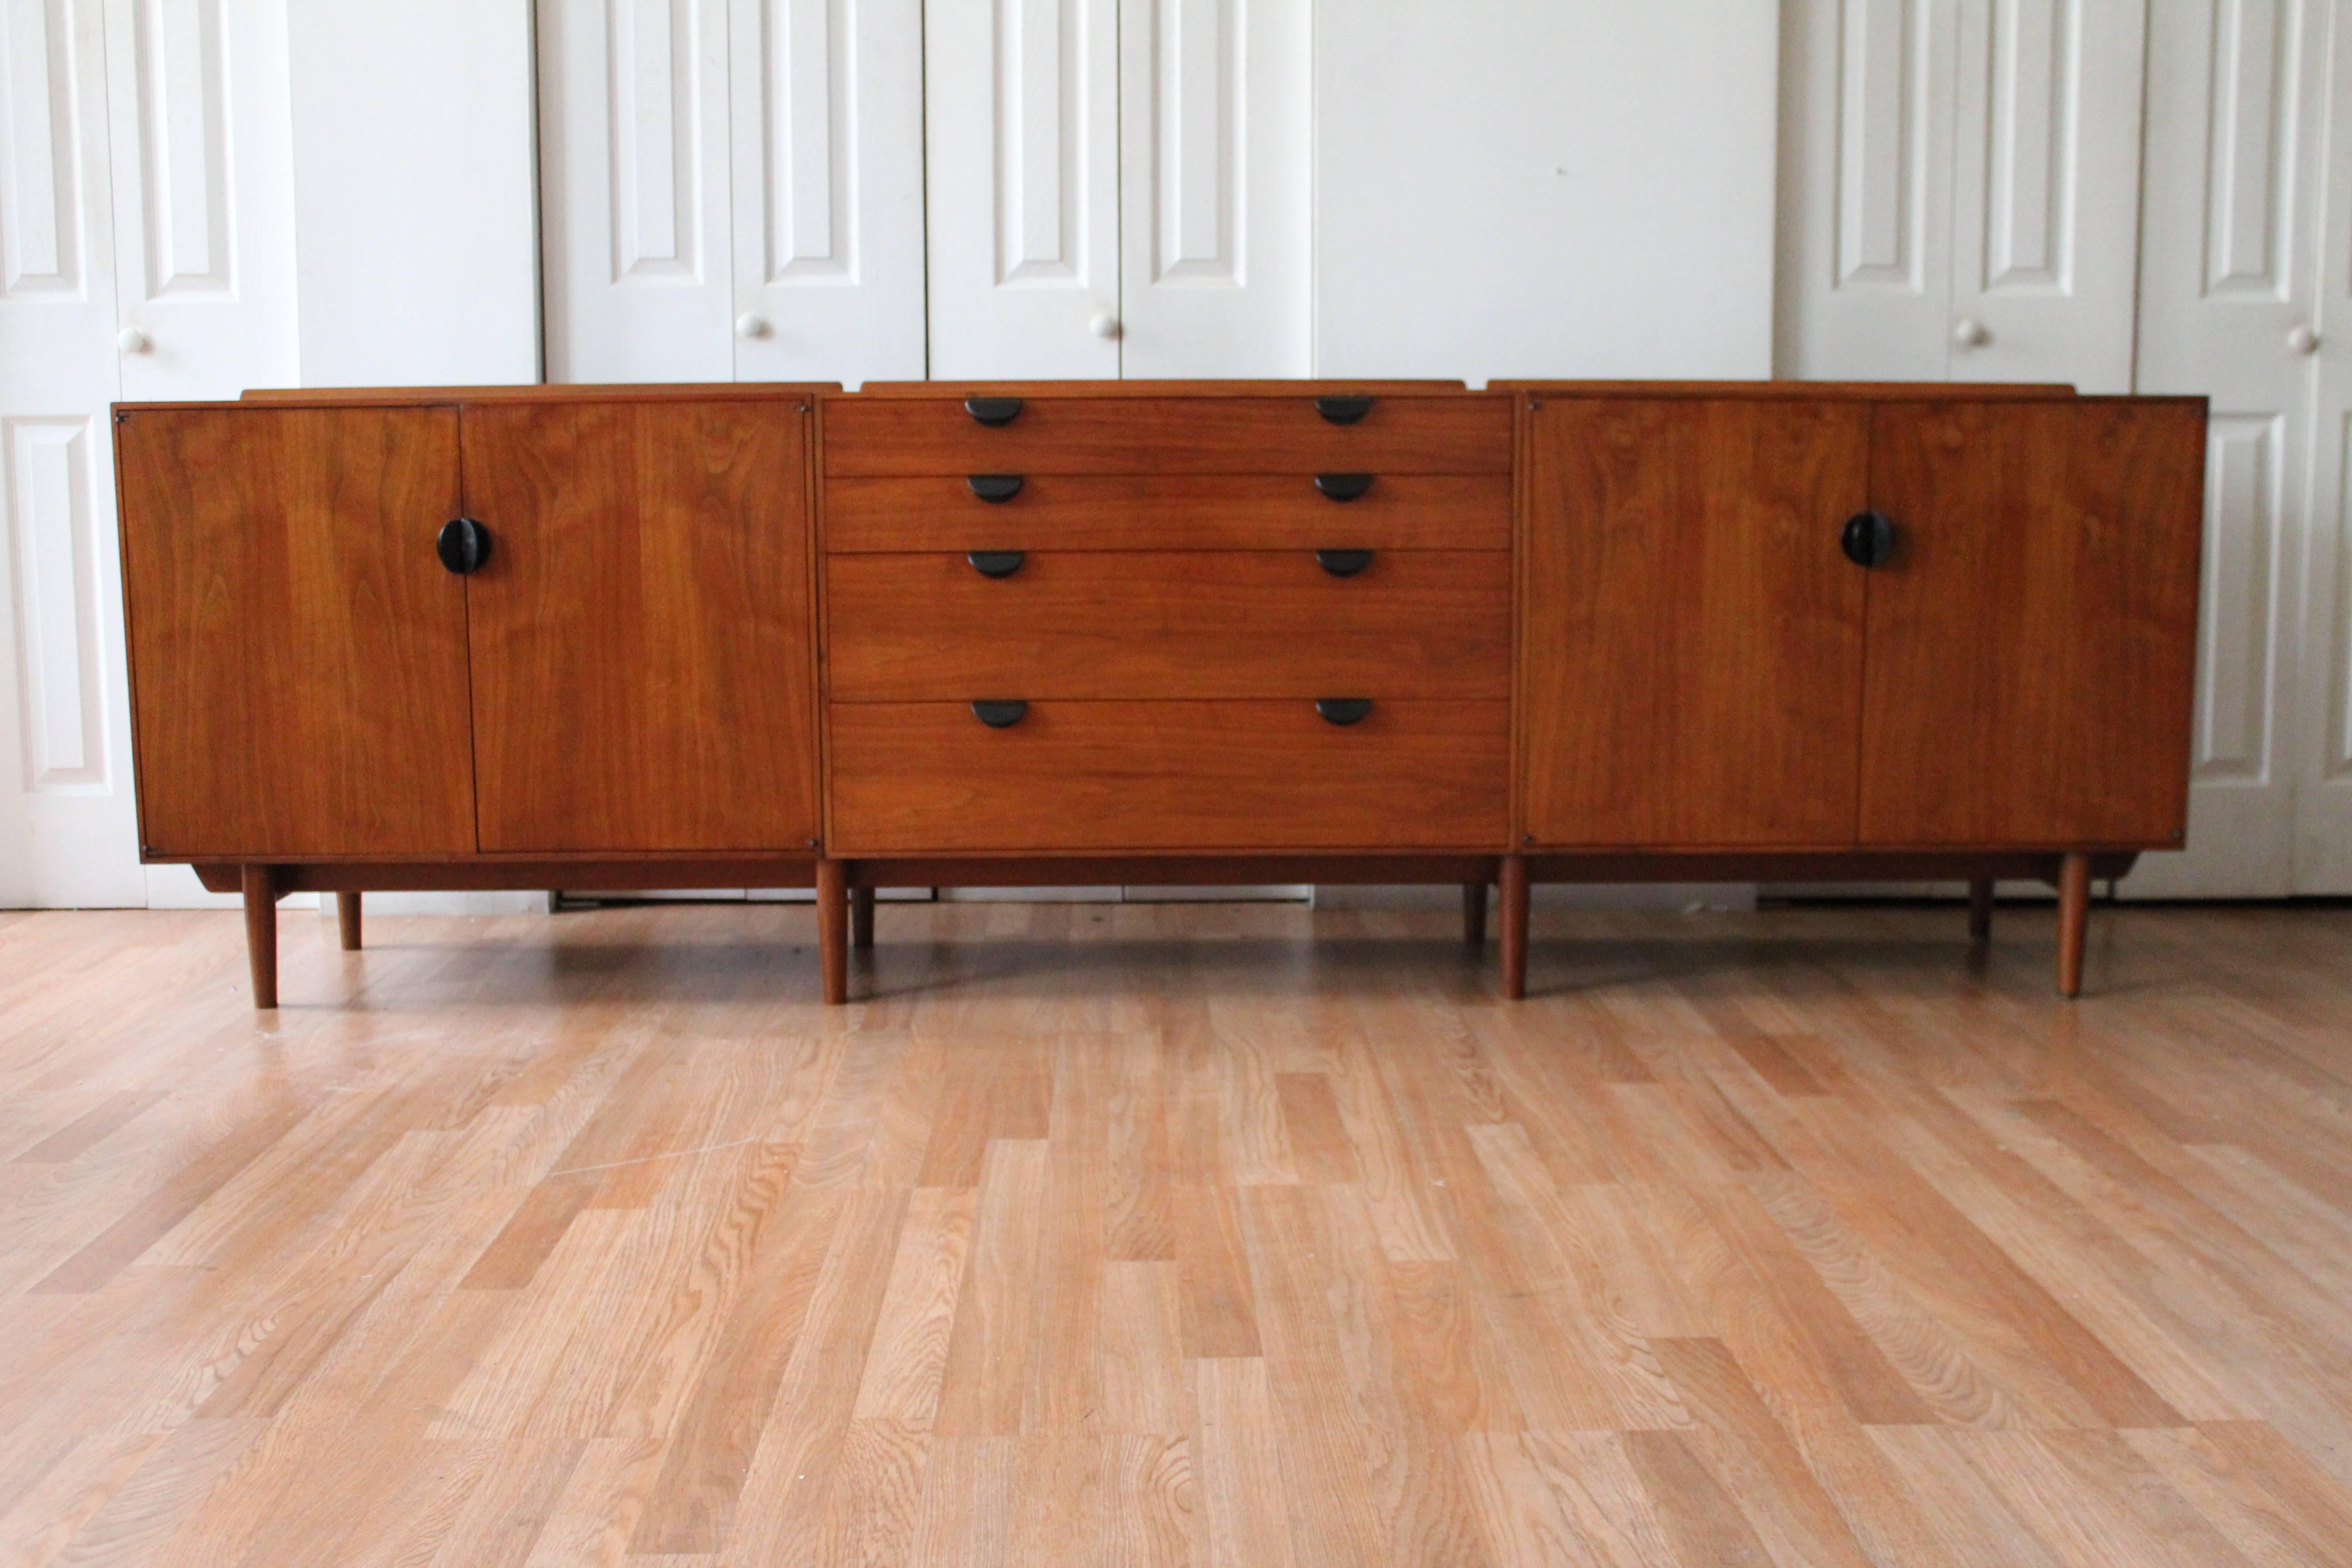 Building an heirloom portfolio? Then consider this original finish Finn Juhl special order sideboard. Long lean and mean, it houses three separate cabinets on a single stretcher. An exceptional piece for the true purist in us all.

Questions?